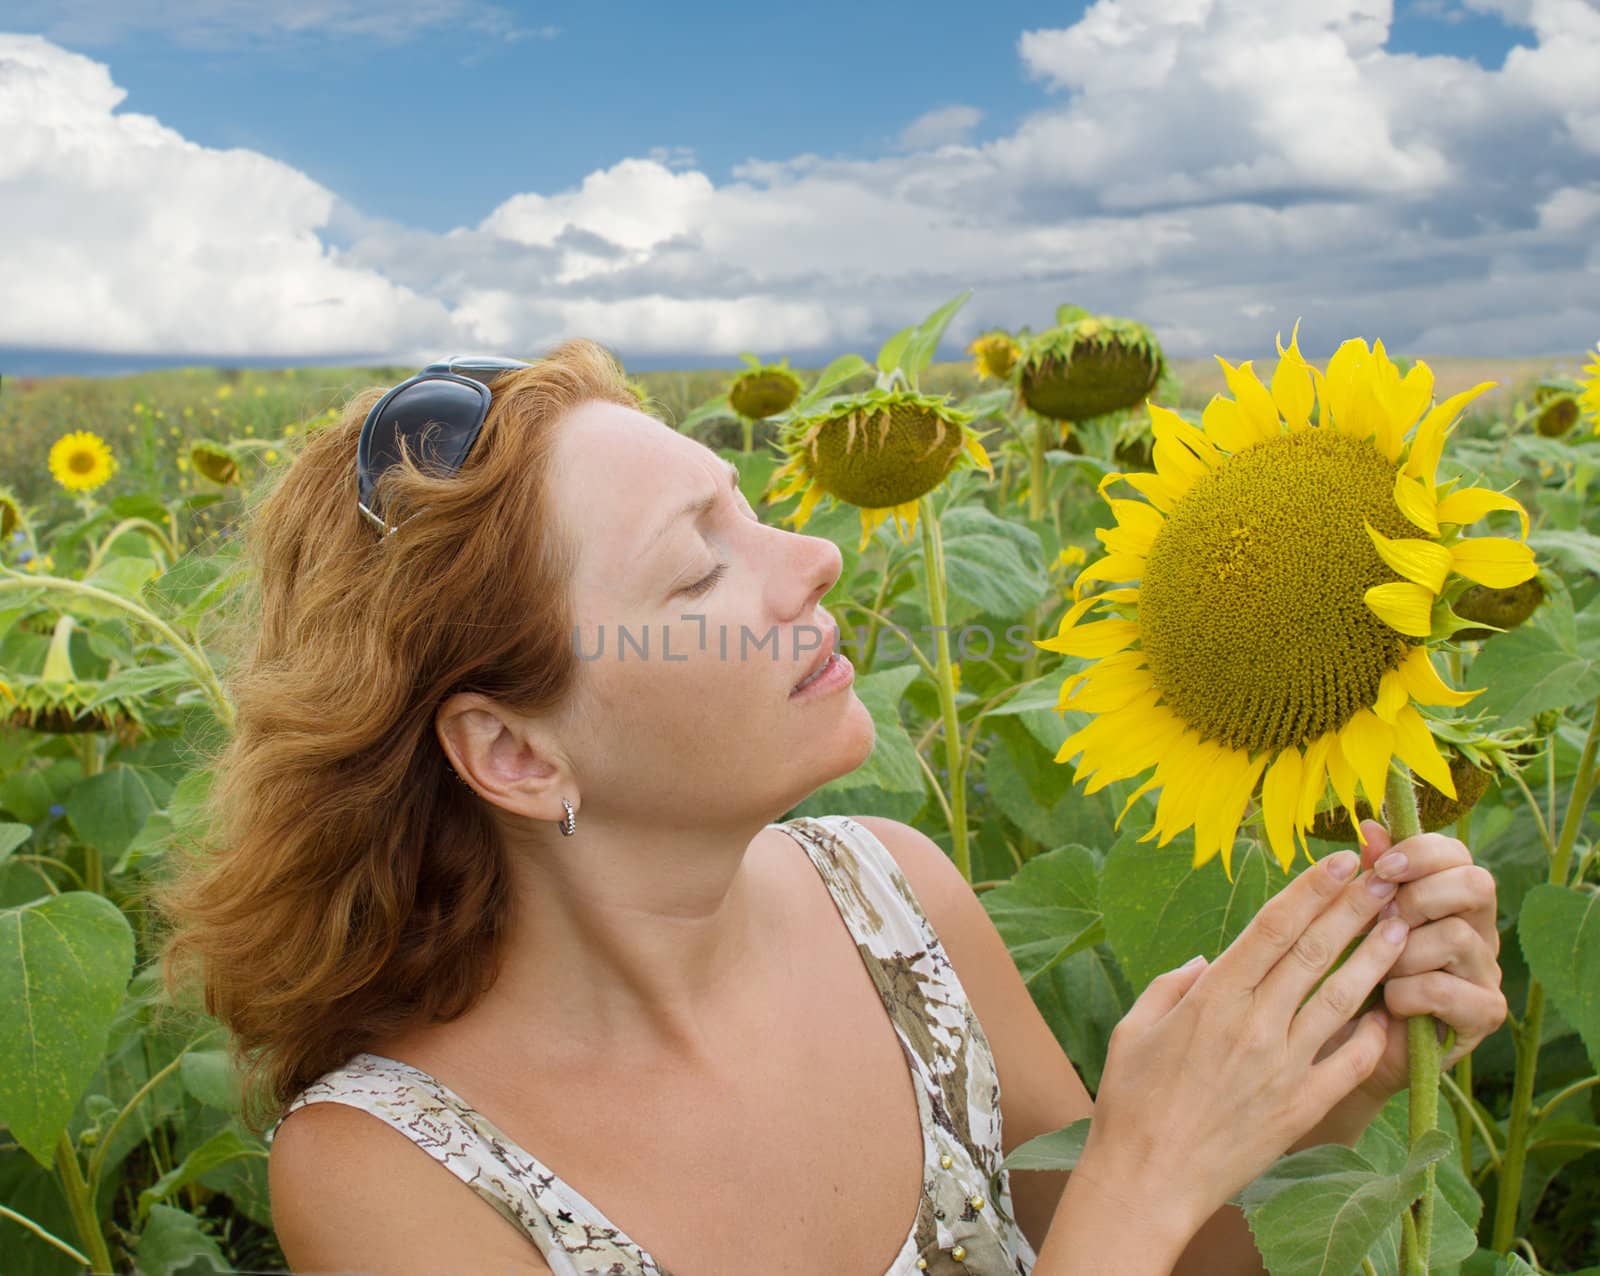 The beautiful woman in the field of sunflowers by BIG_TAU